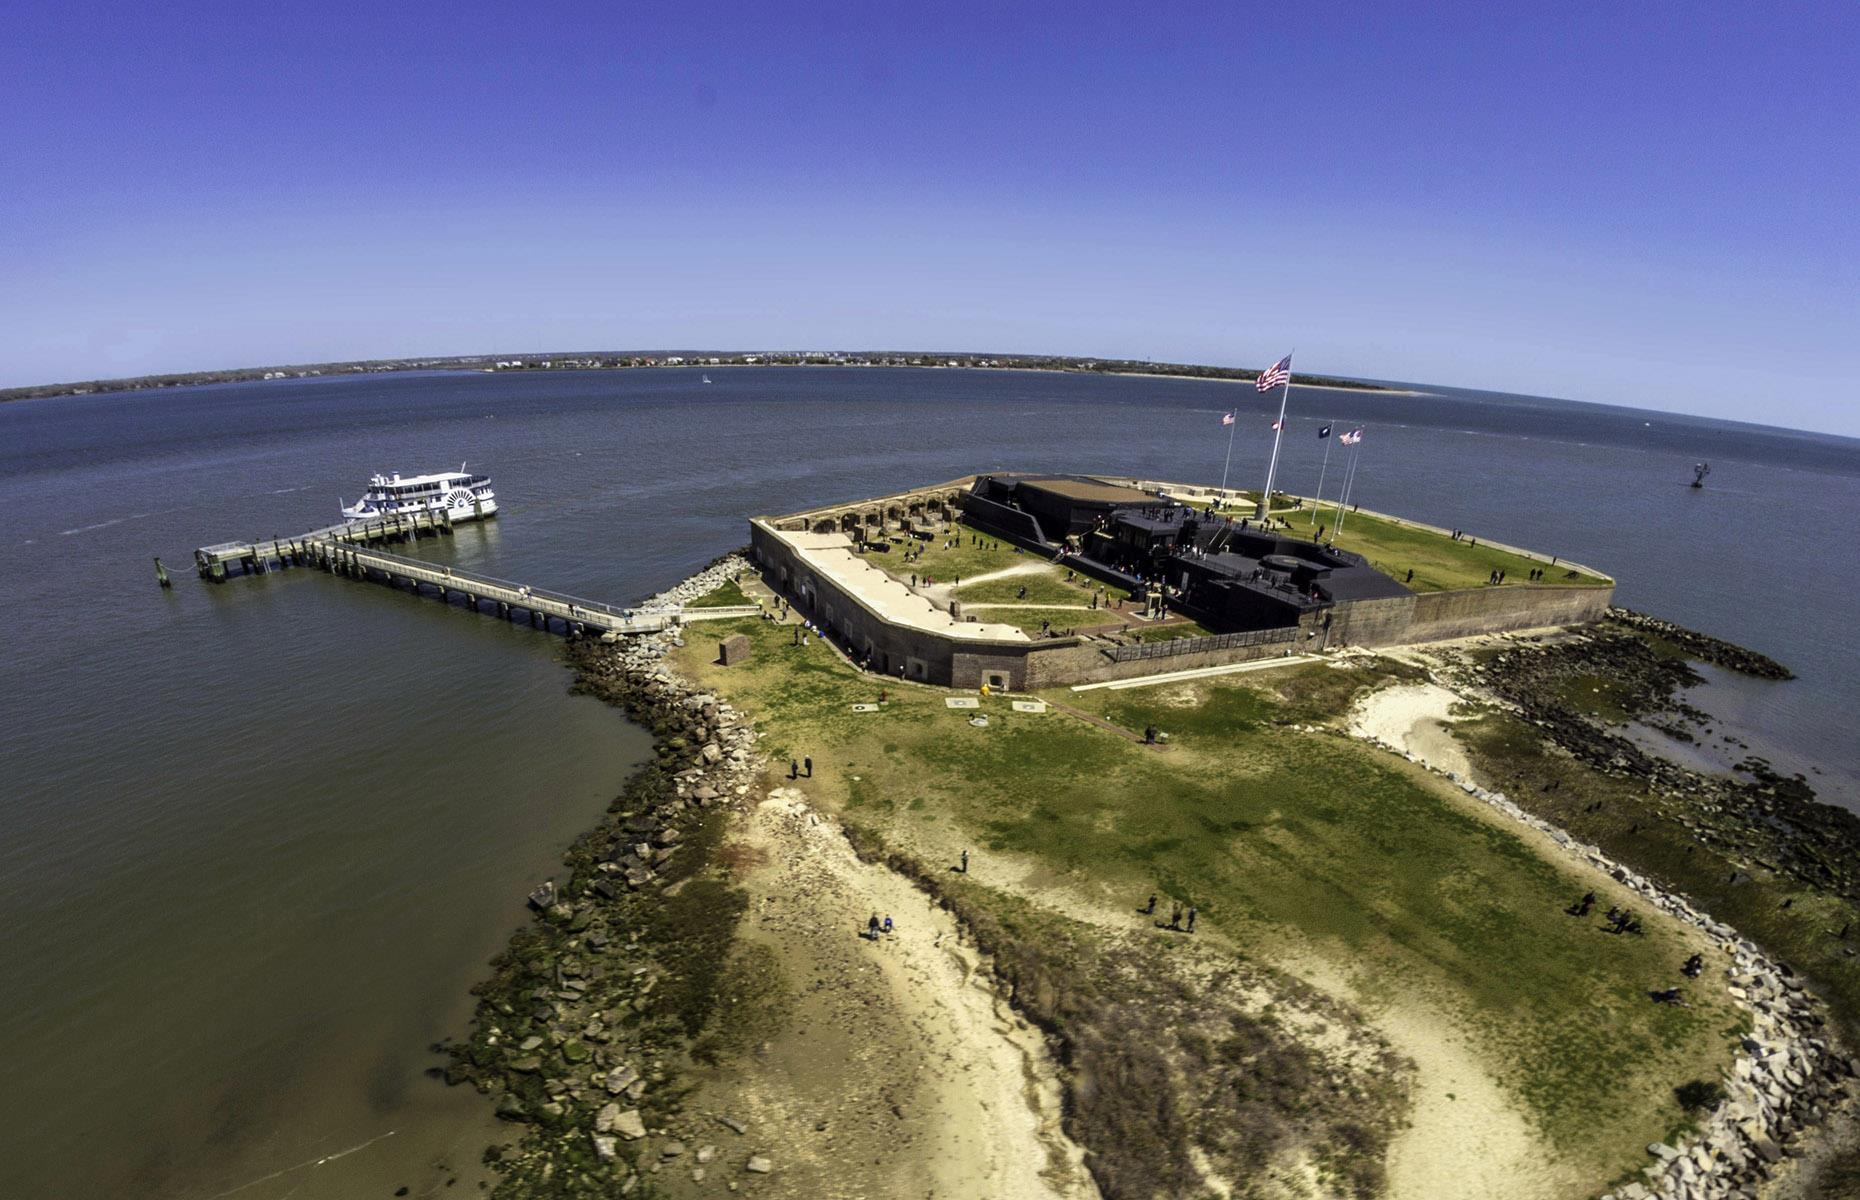 <p>In 1861, the first shots of the bloody American Civil War were fired from Fort Sumter, a garrison with a strategic position at the mouth of Charleston Harbor. It played a key role throughout the conflict and the immaculately preserved fort ruins remain today. Guided tours of the historic site, which is accessible only by boat, are usually available, but check <a href="https://www.nps.gov/fosu/planyourvisit/guidedtours.htm">the NPS website</a> for current details.</p>